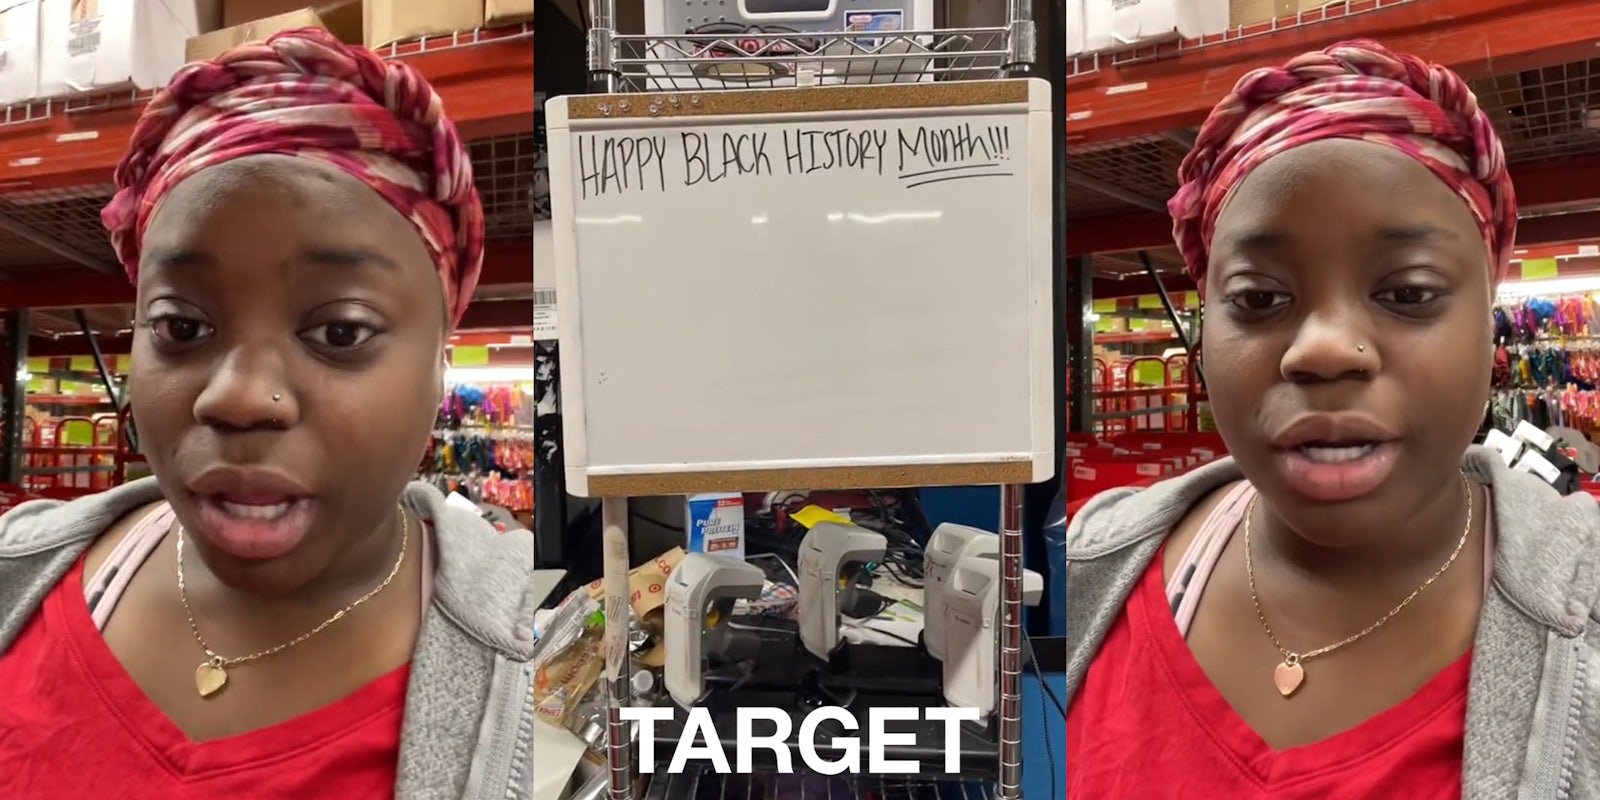 Target employee speaking (l) whiteboard in Target with writing 'HAPPY BLACK HISTORY MONTH!!!' and Target logo at bottom (c) Target employee speaking (r)